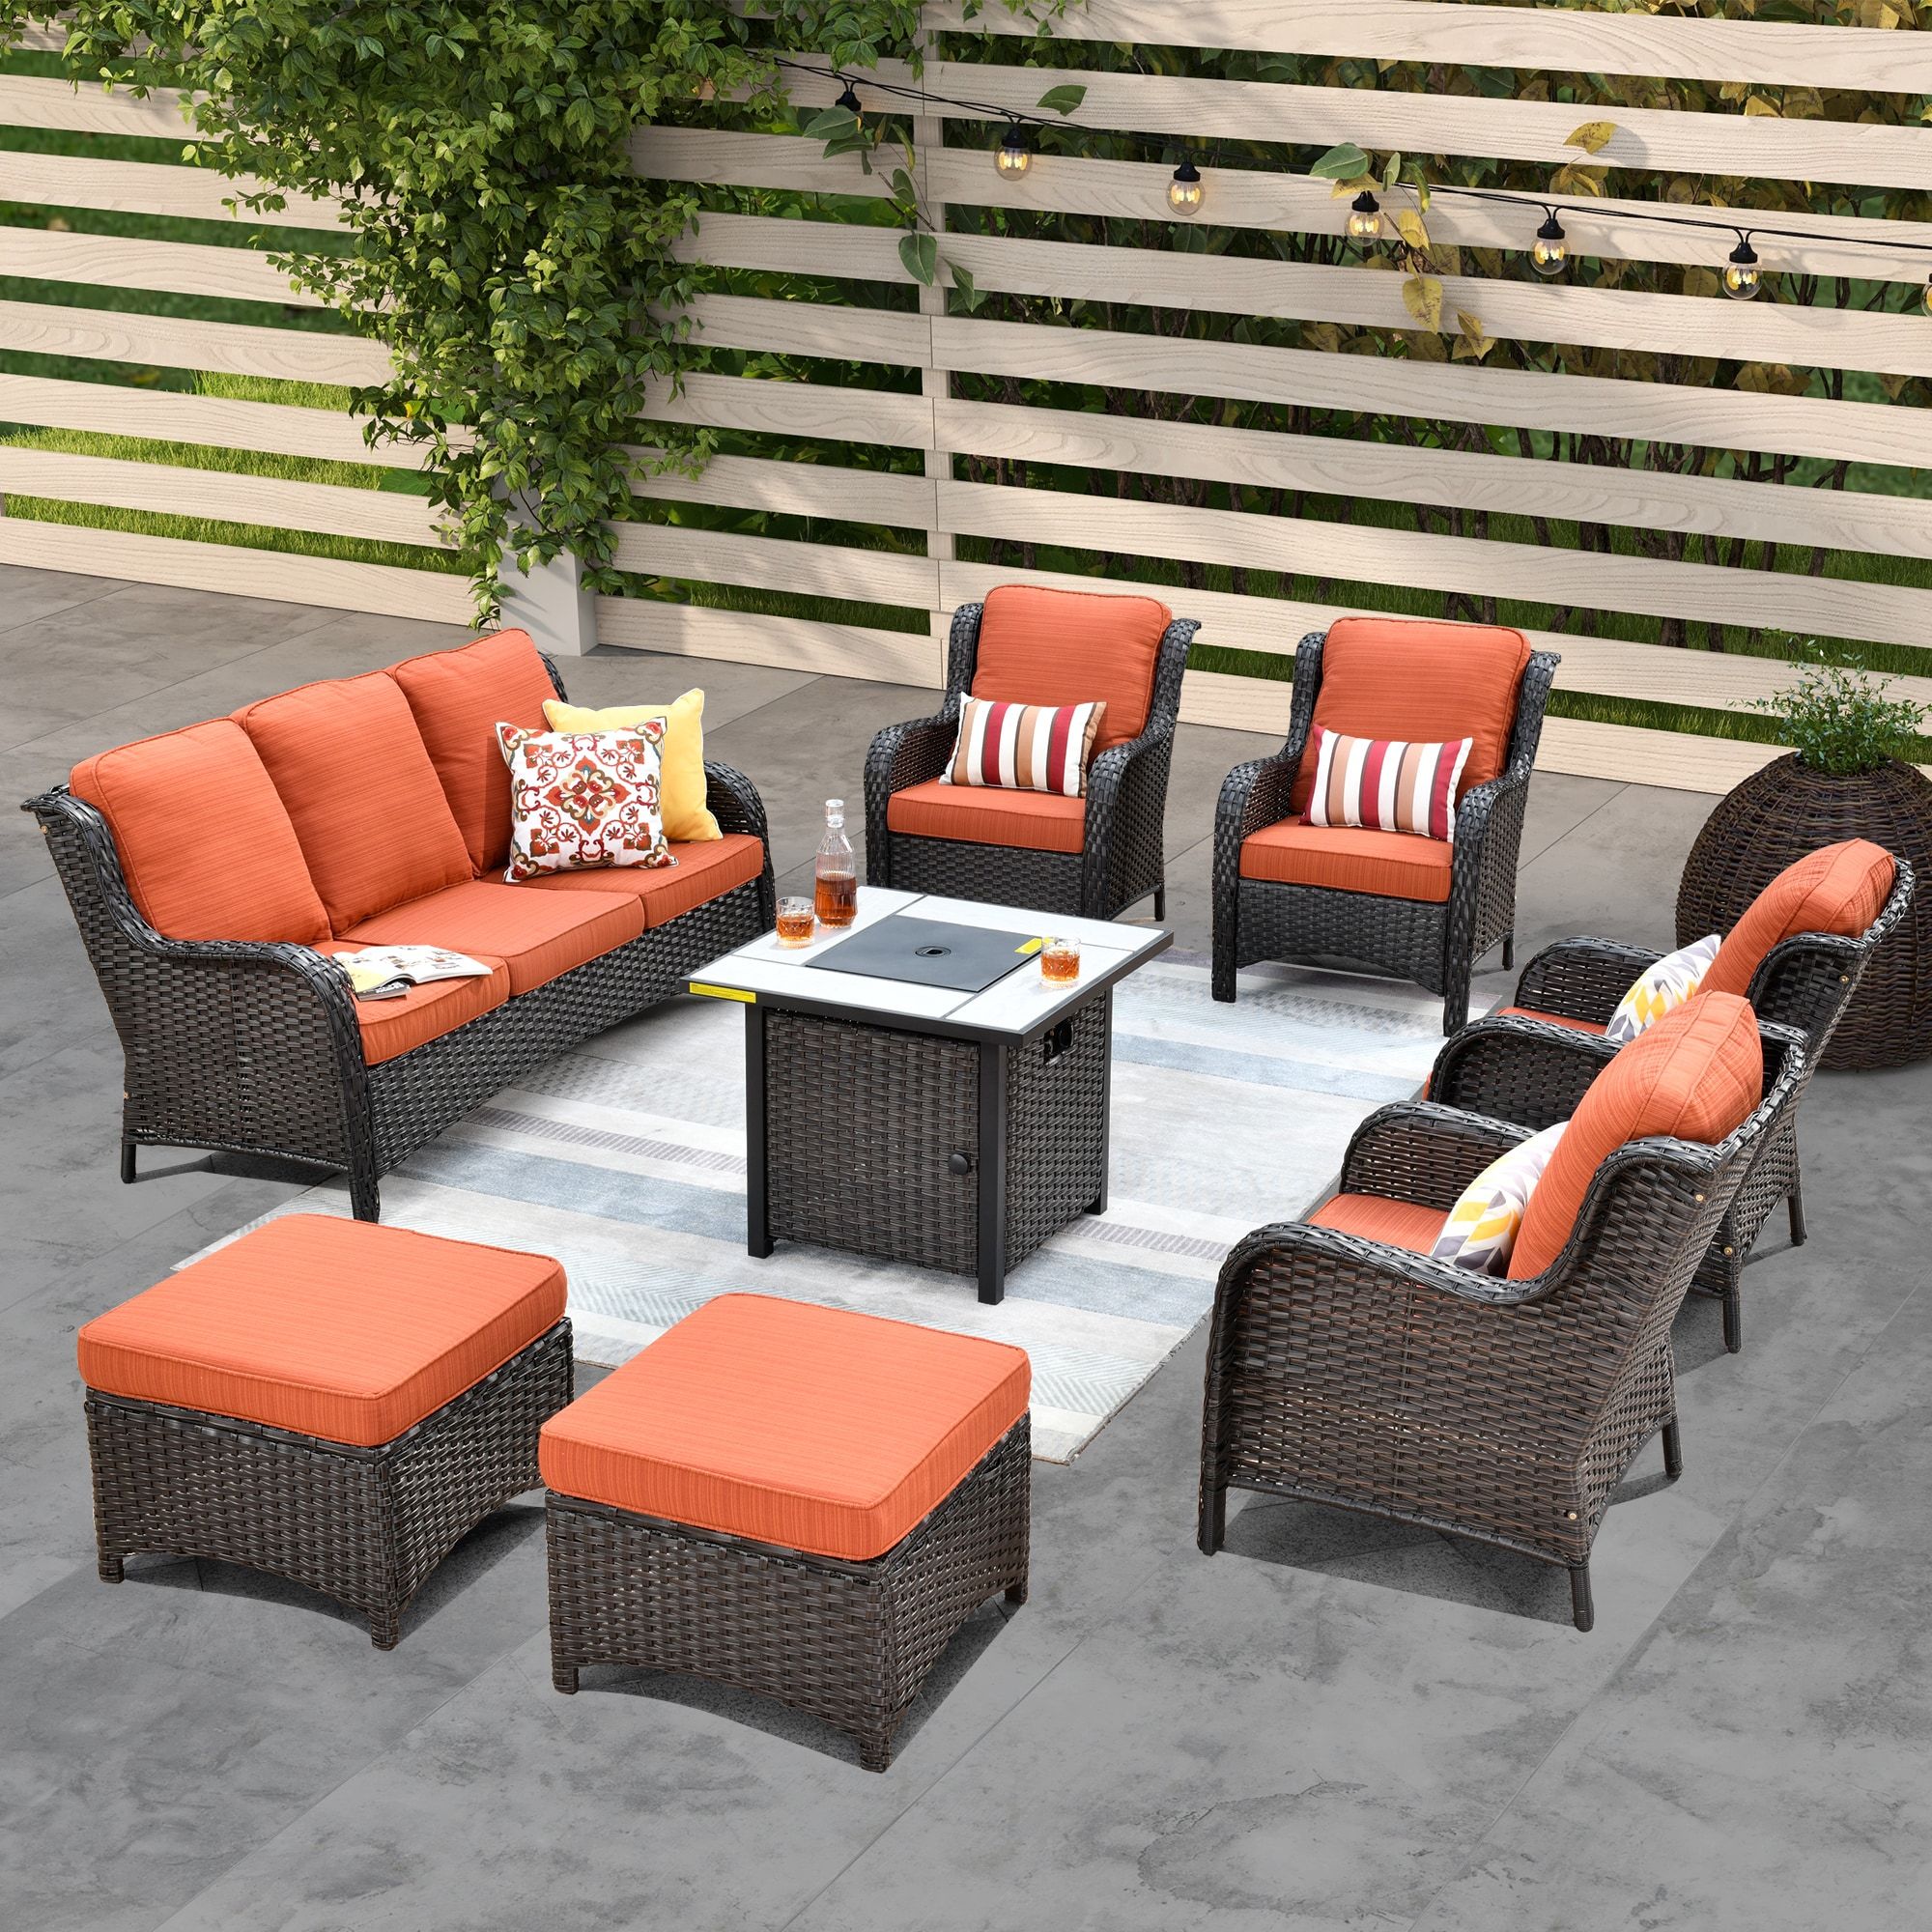 Ovios 8 Piece Patio Furniture Sets Rattan Wicker Chair Sectional Sofa Deep  Seating Conversation Set With Gas Fire Pit Table (brown Wicker,orange Red  Cushions) In The Patio Conversation Sets Department At Lowes With Fire Pit Table Wicker Sectional Sofa Conversation Set (Photo 14 of 15)